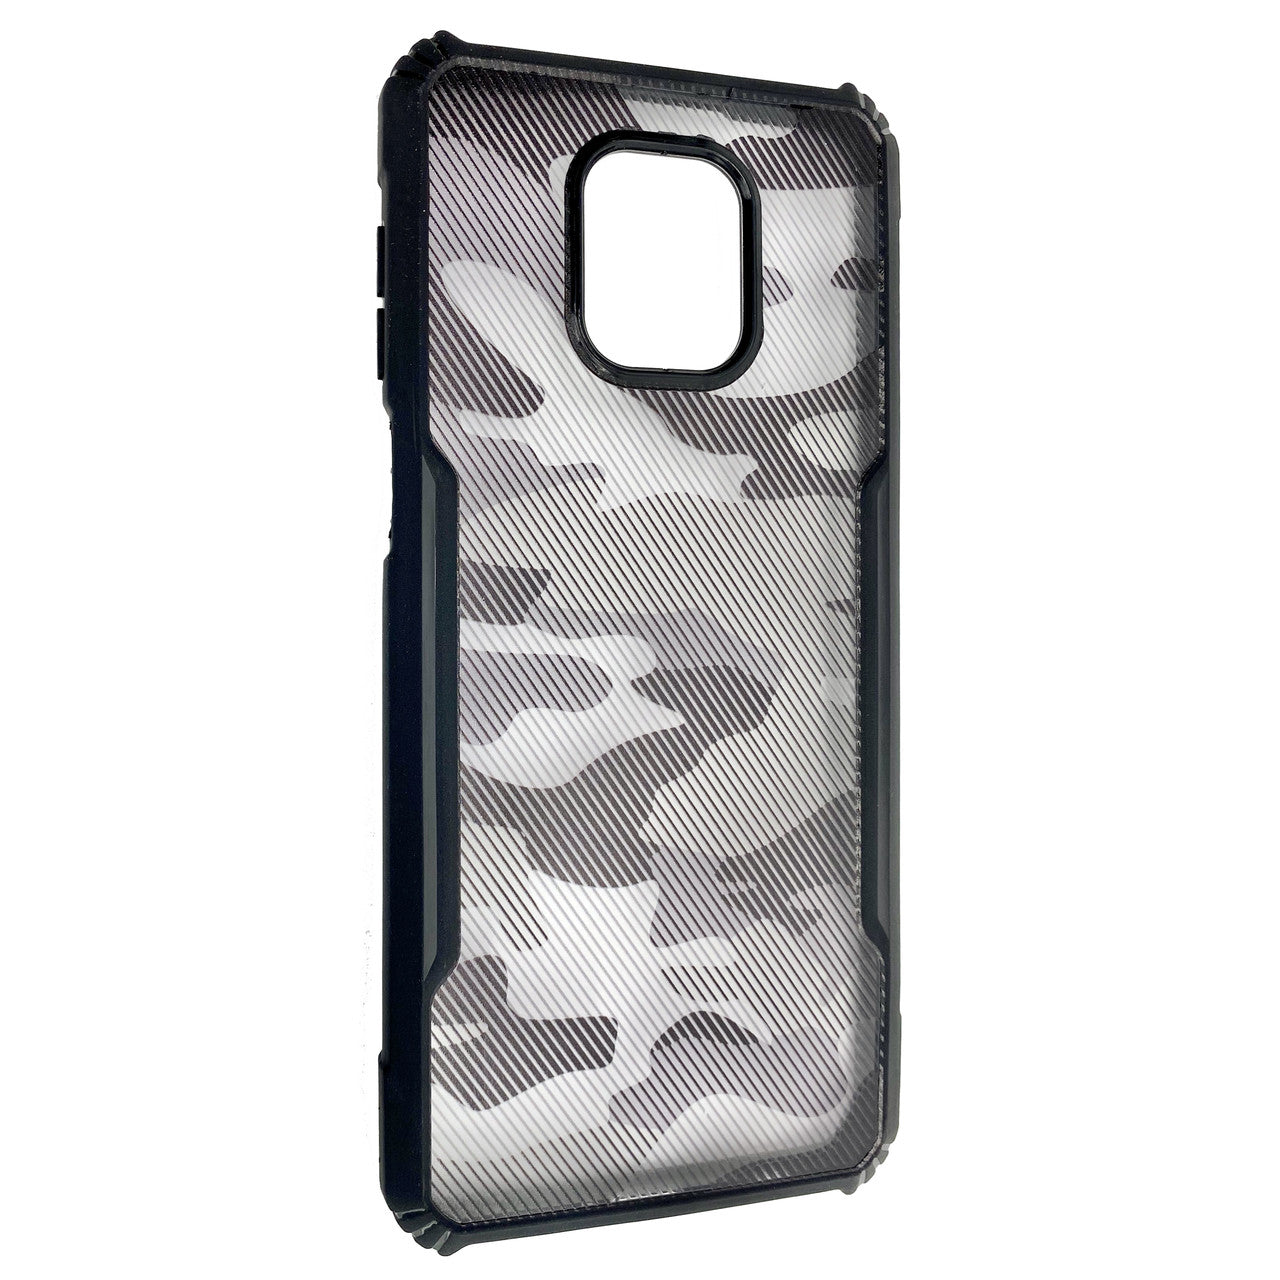 RZANTS Beetle Camouflage Hybrid Fusion Armor For Huawei